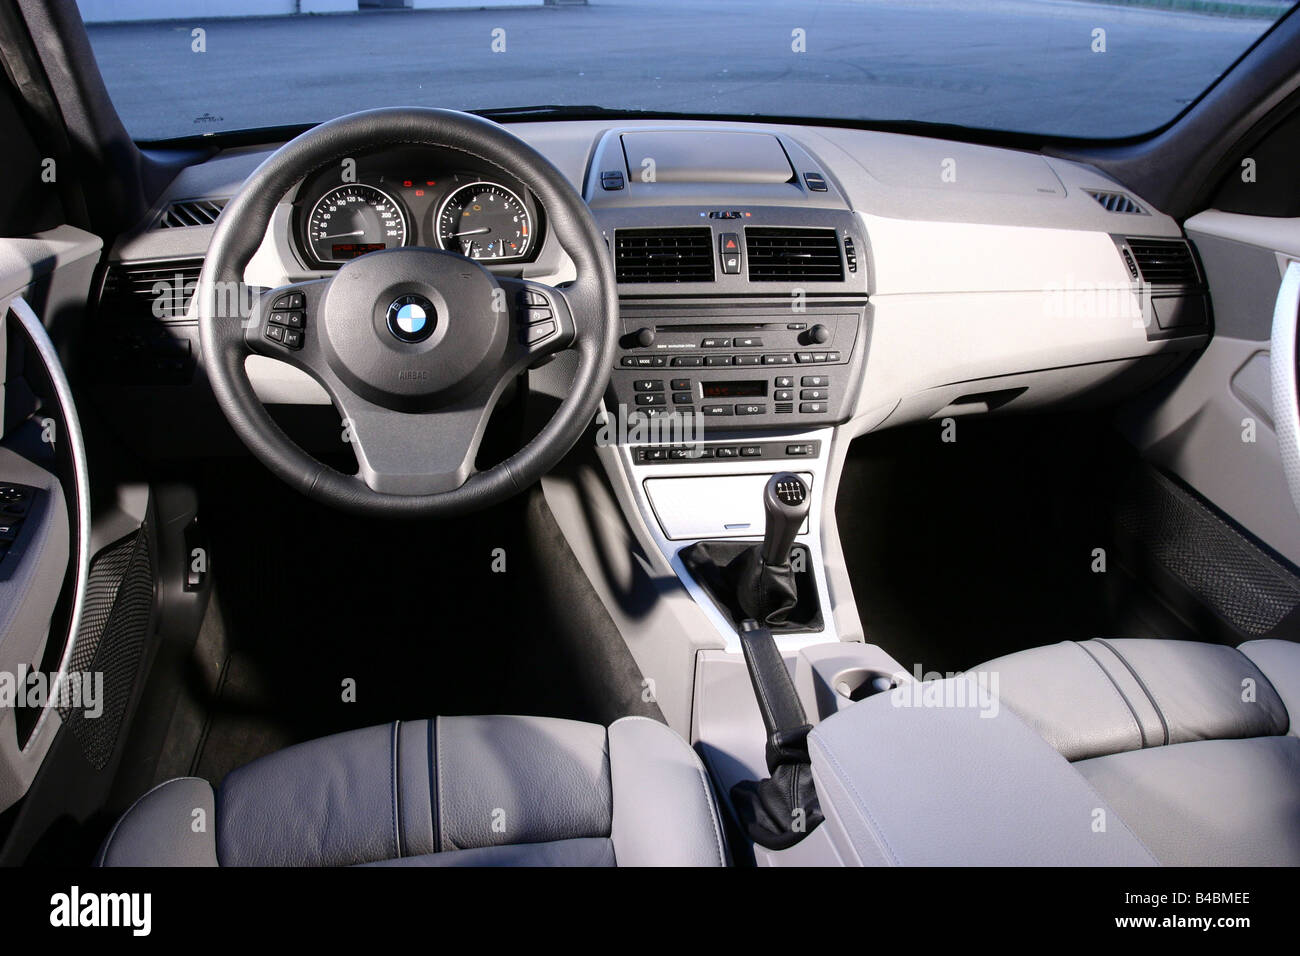 Car, BMW X3 3.0i, cross country vehicle, model year 2003-, dark blue, FGHDS, interior view, Interior view, Cockpit, technique/ac Stock Photo